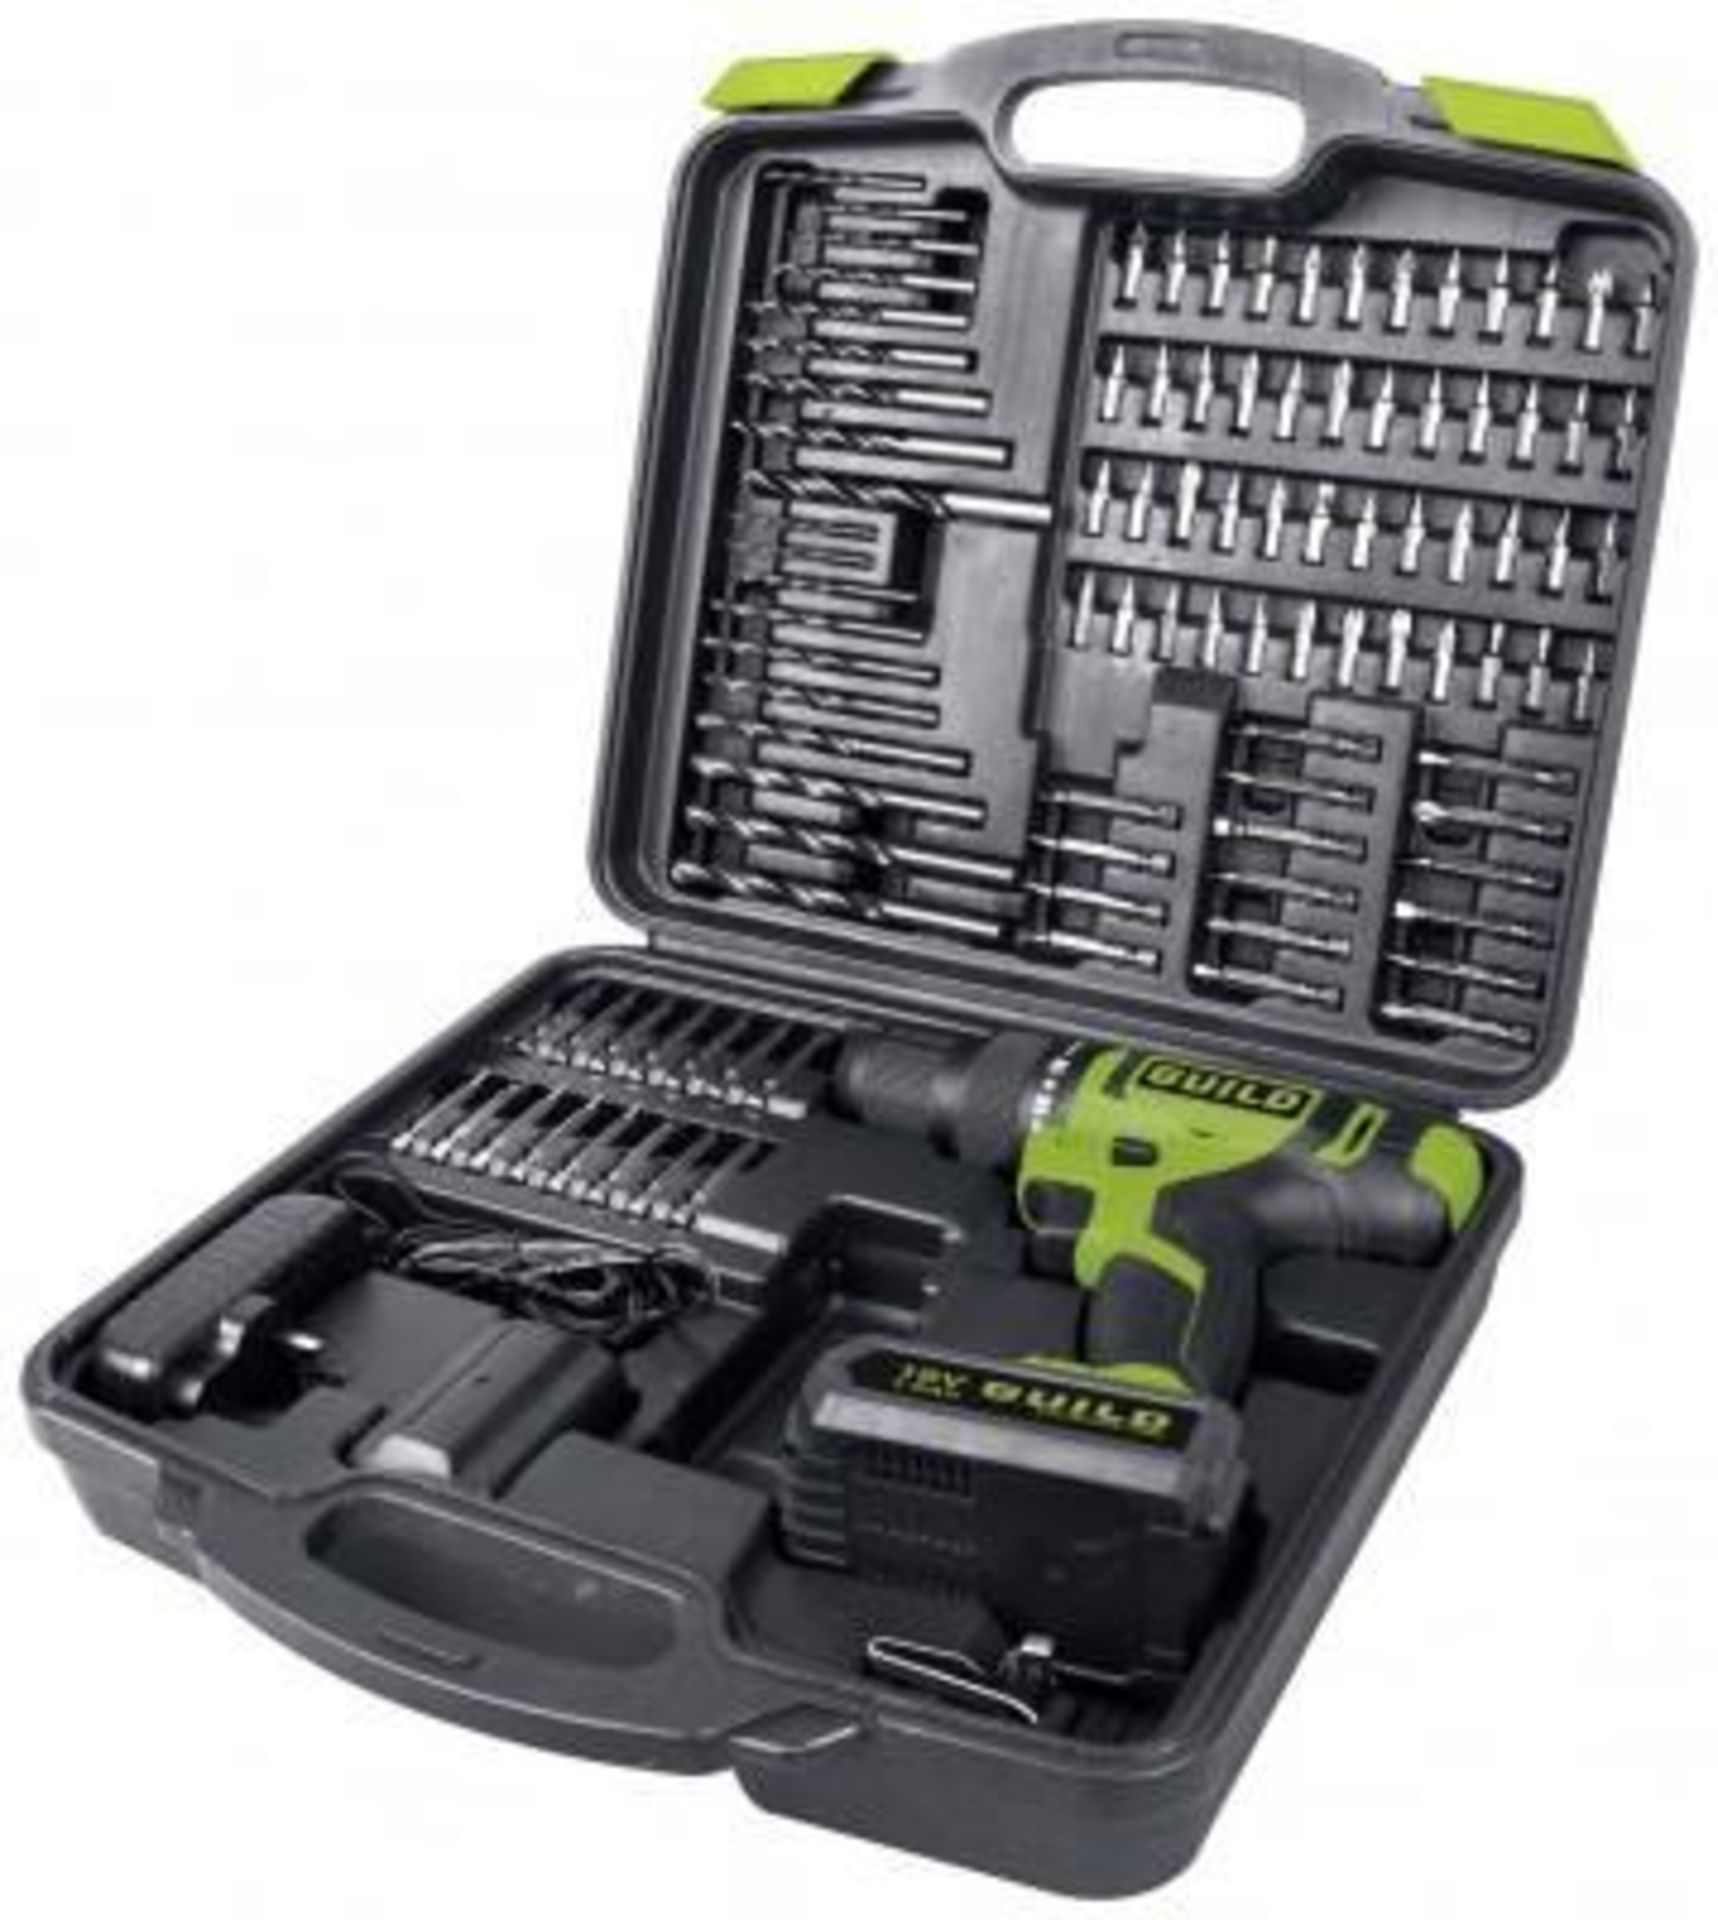 Guild 1.5Ah Cordless Combi Drill with 100 Accessories - 18V, £50.00 RRP